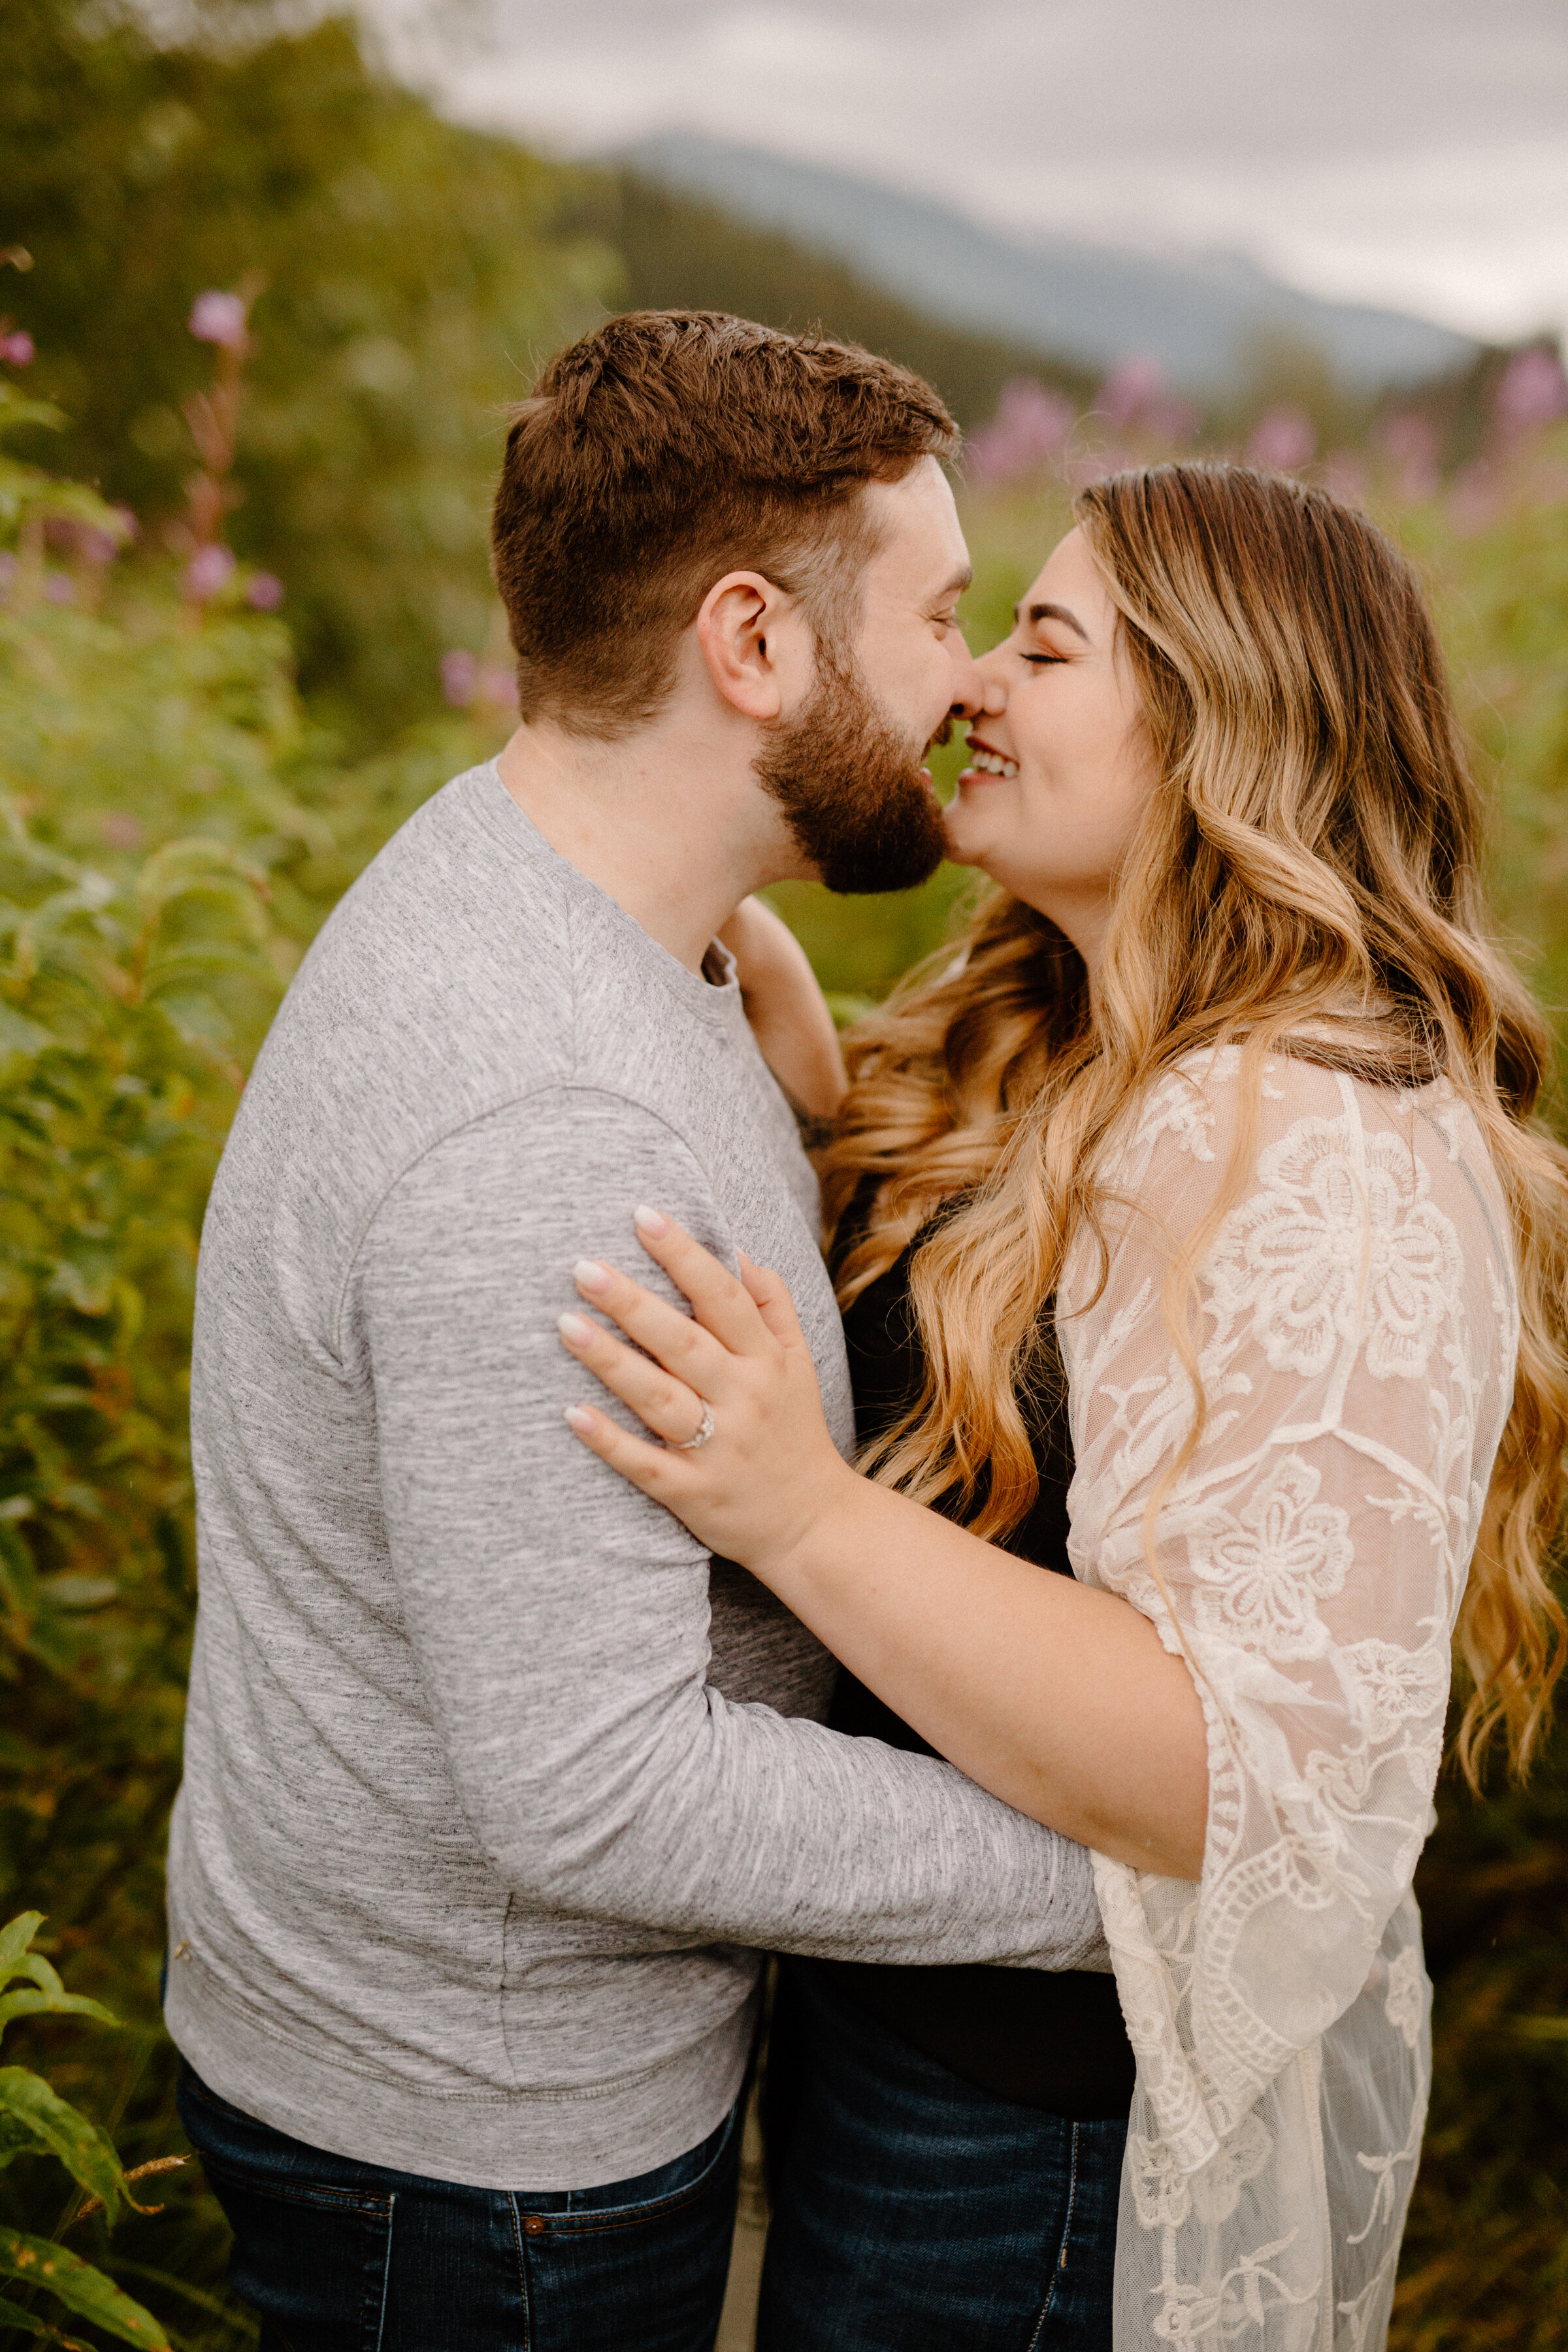 Your Guide to the Best Poses for Engagement Photos